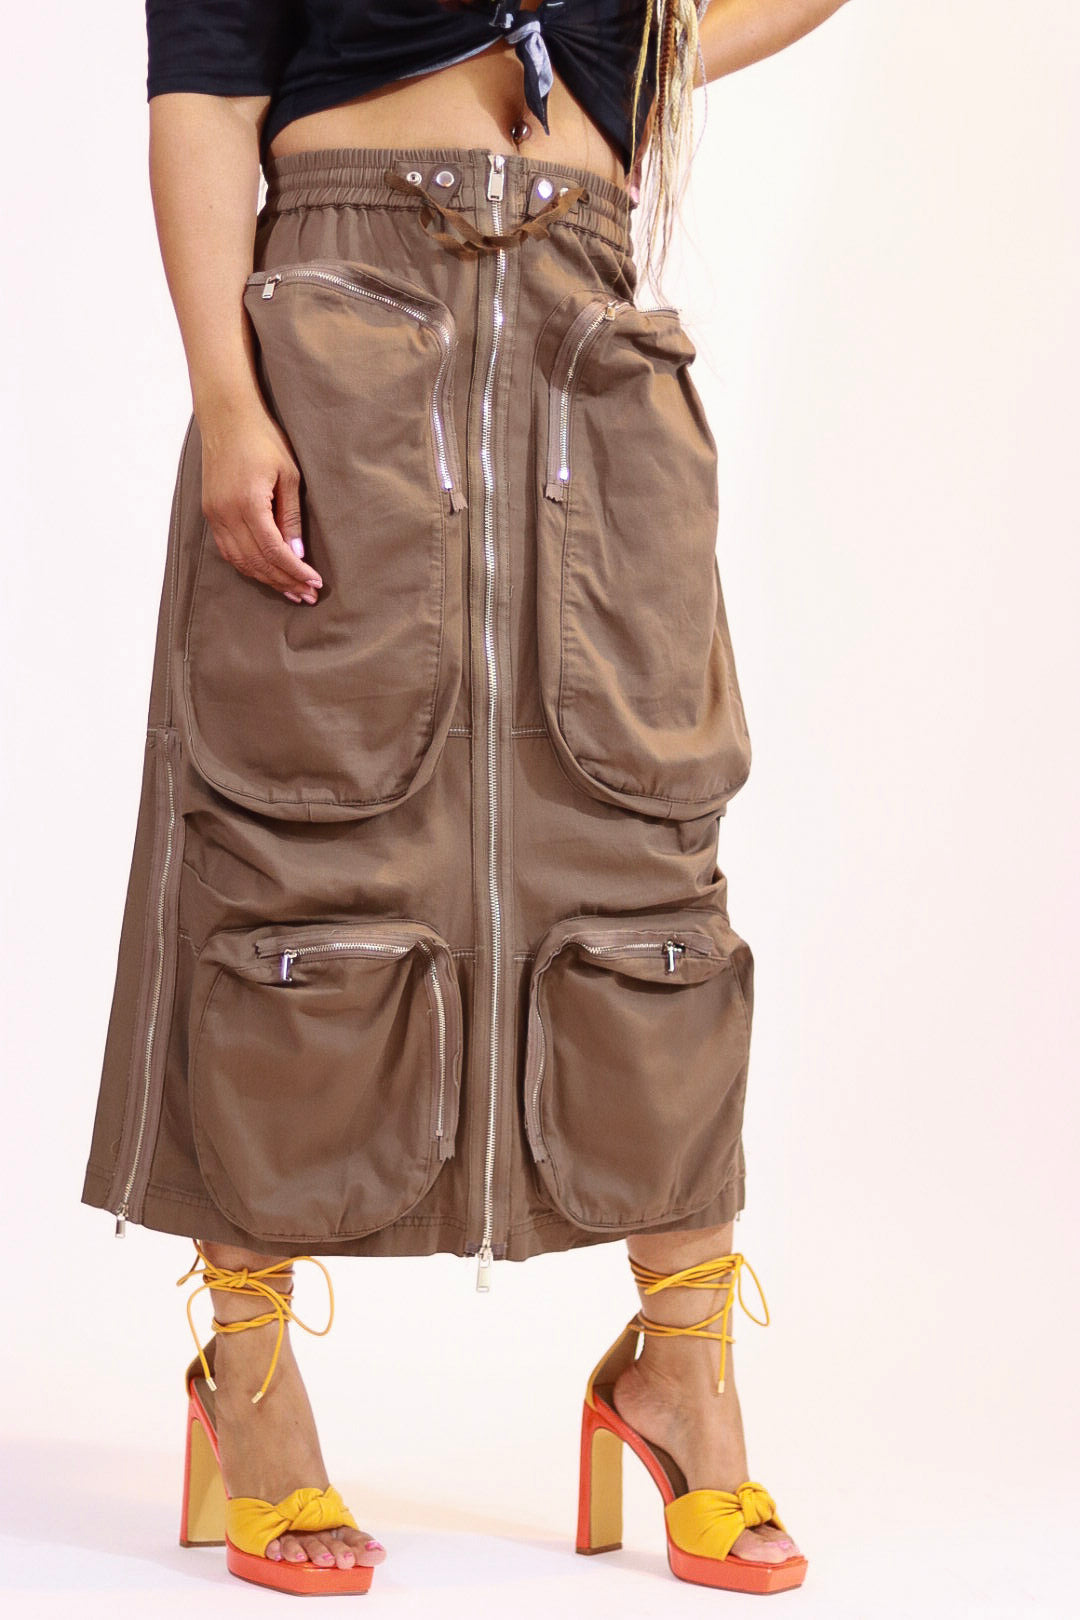 Cargo Skirt with zippers and pockets. Can be worn as a dress or a skirt.